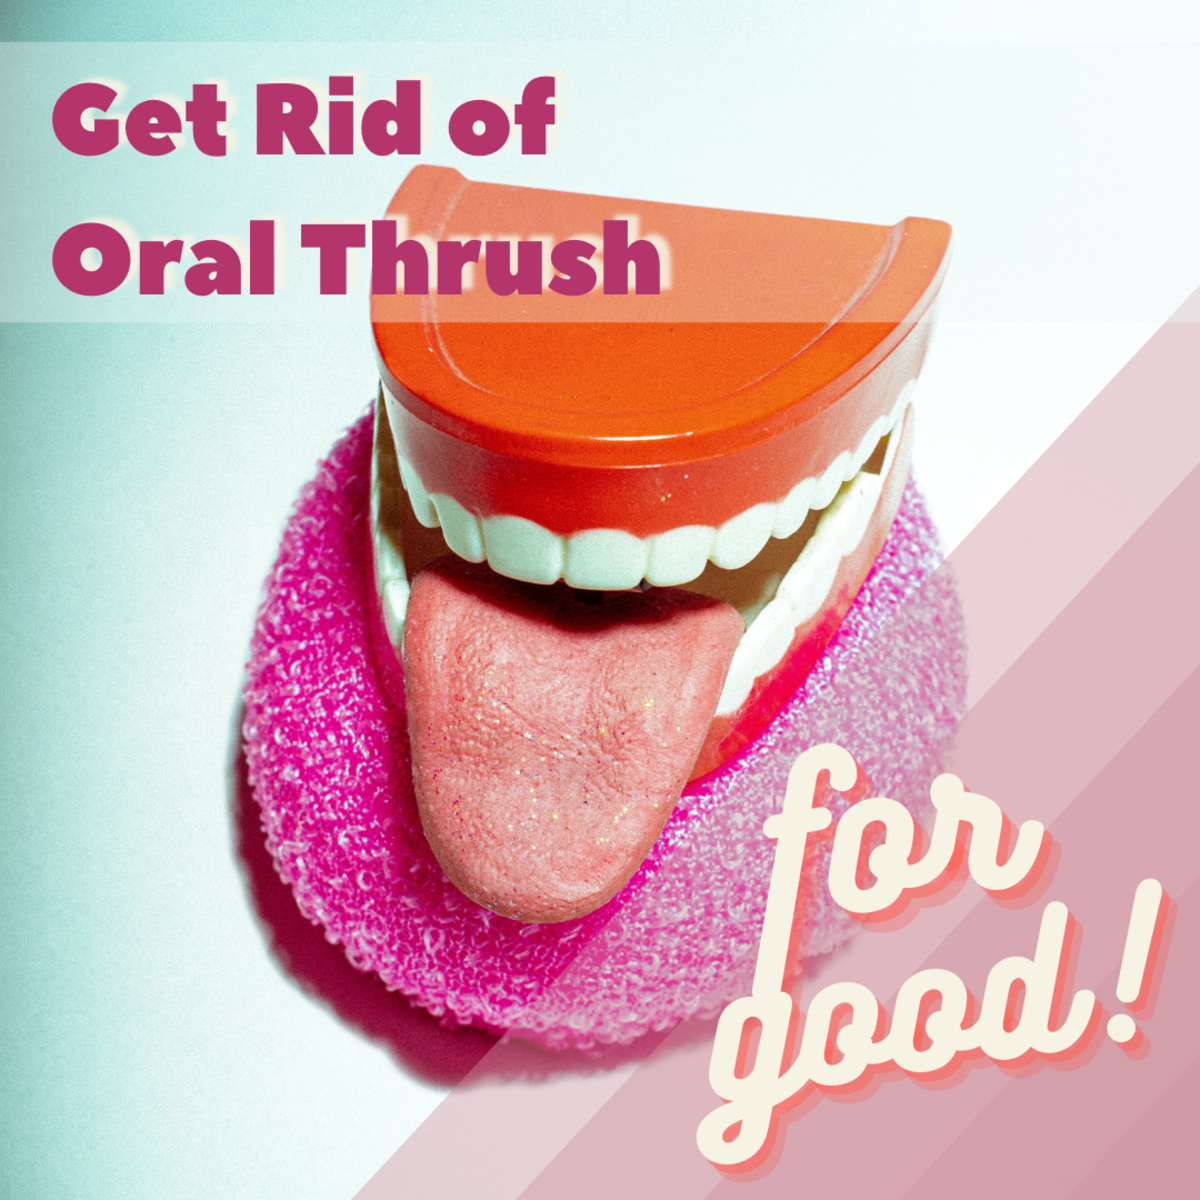 9 Methods for How to Battle Oral Thrush